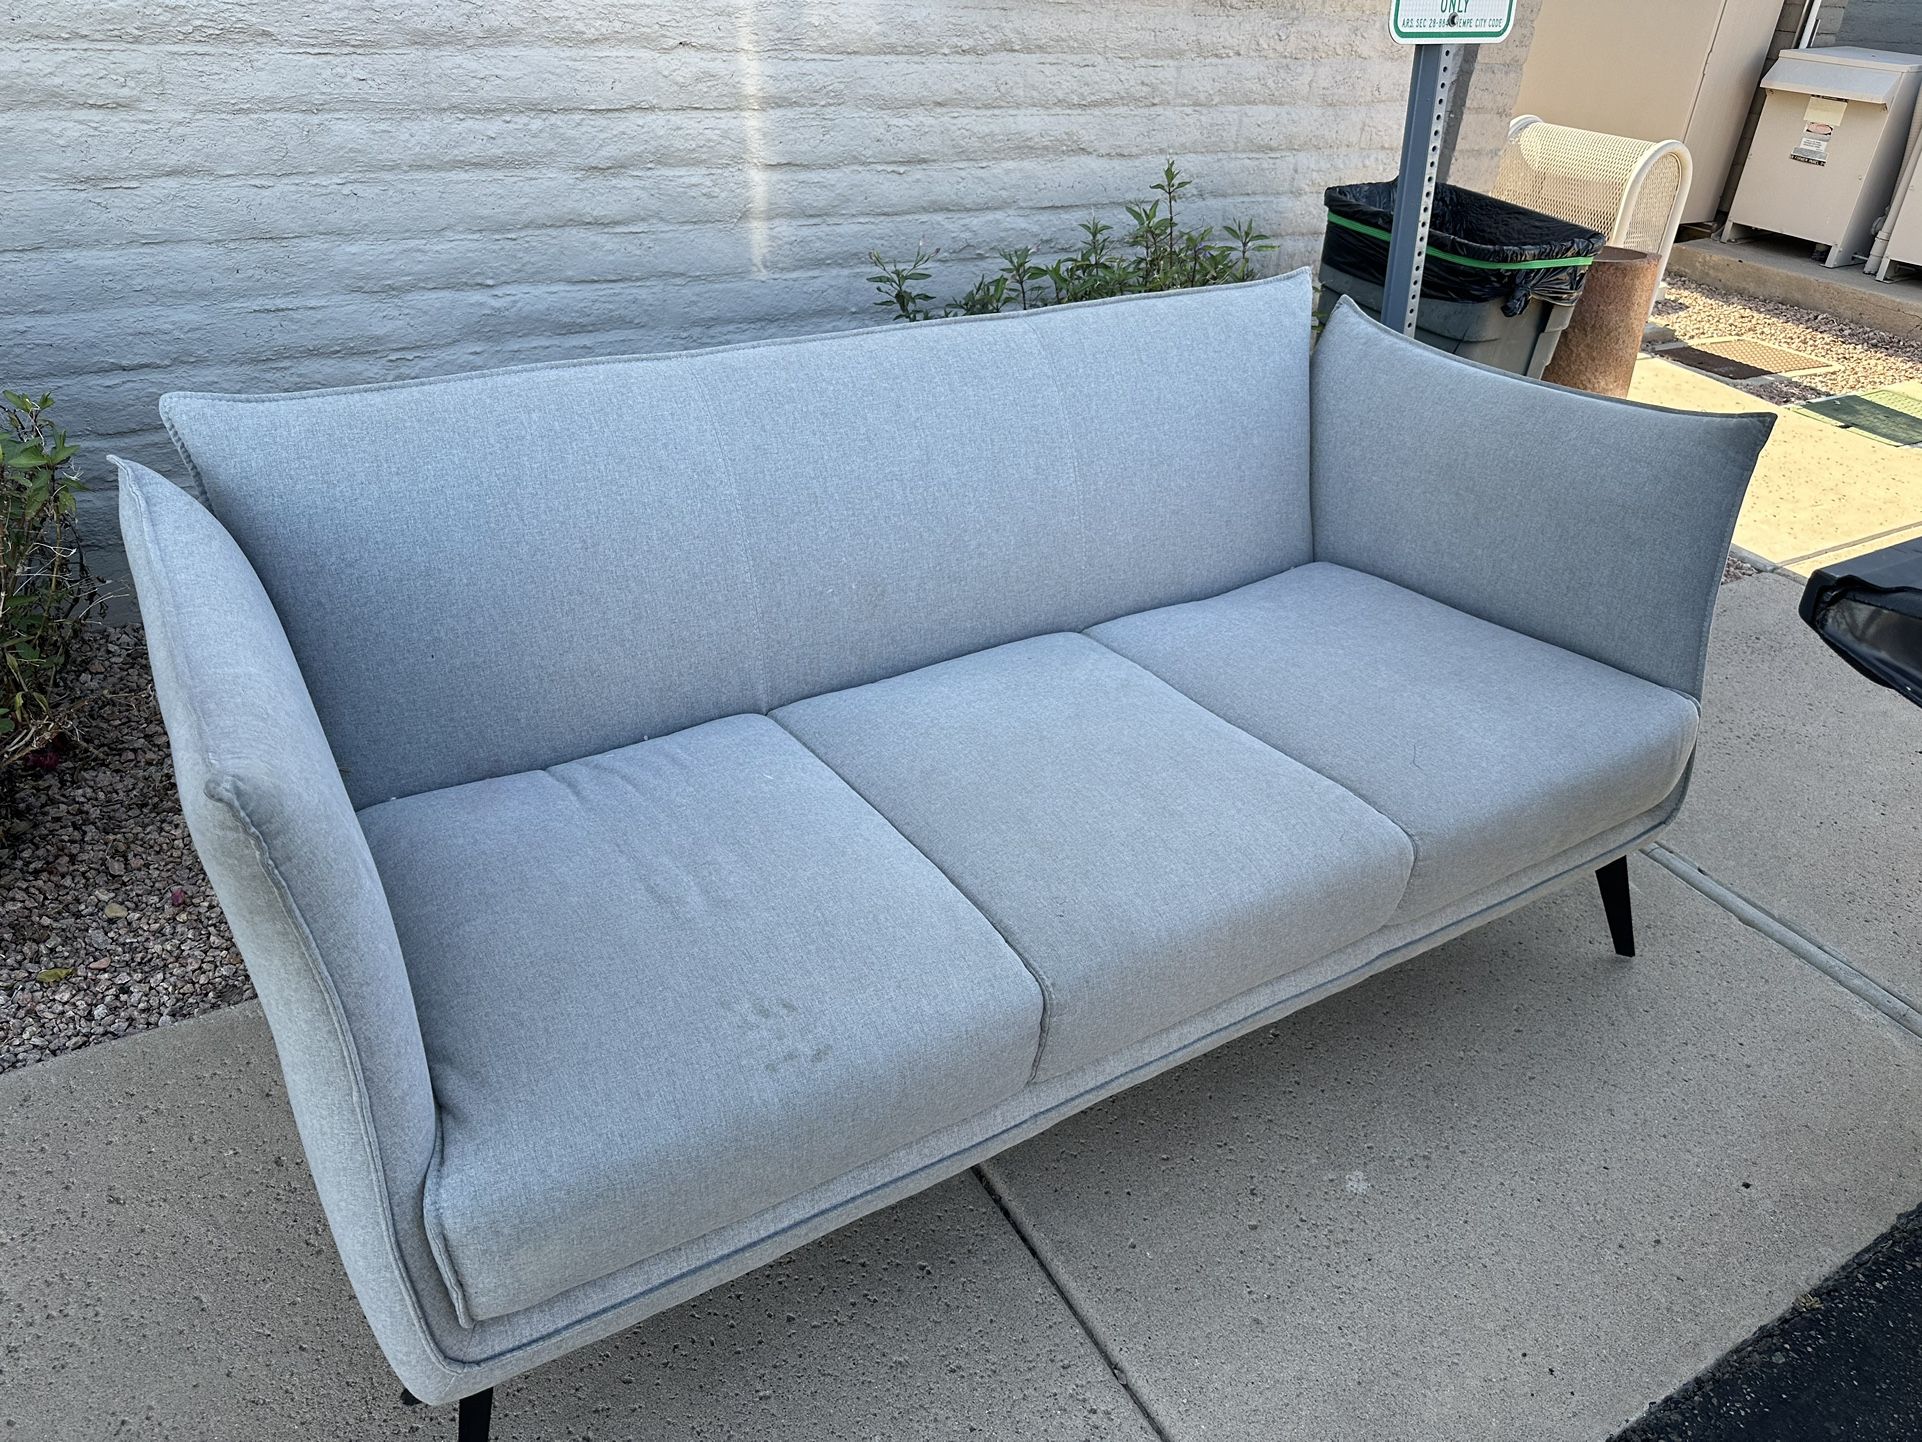 Gray Couch (2)